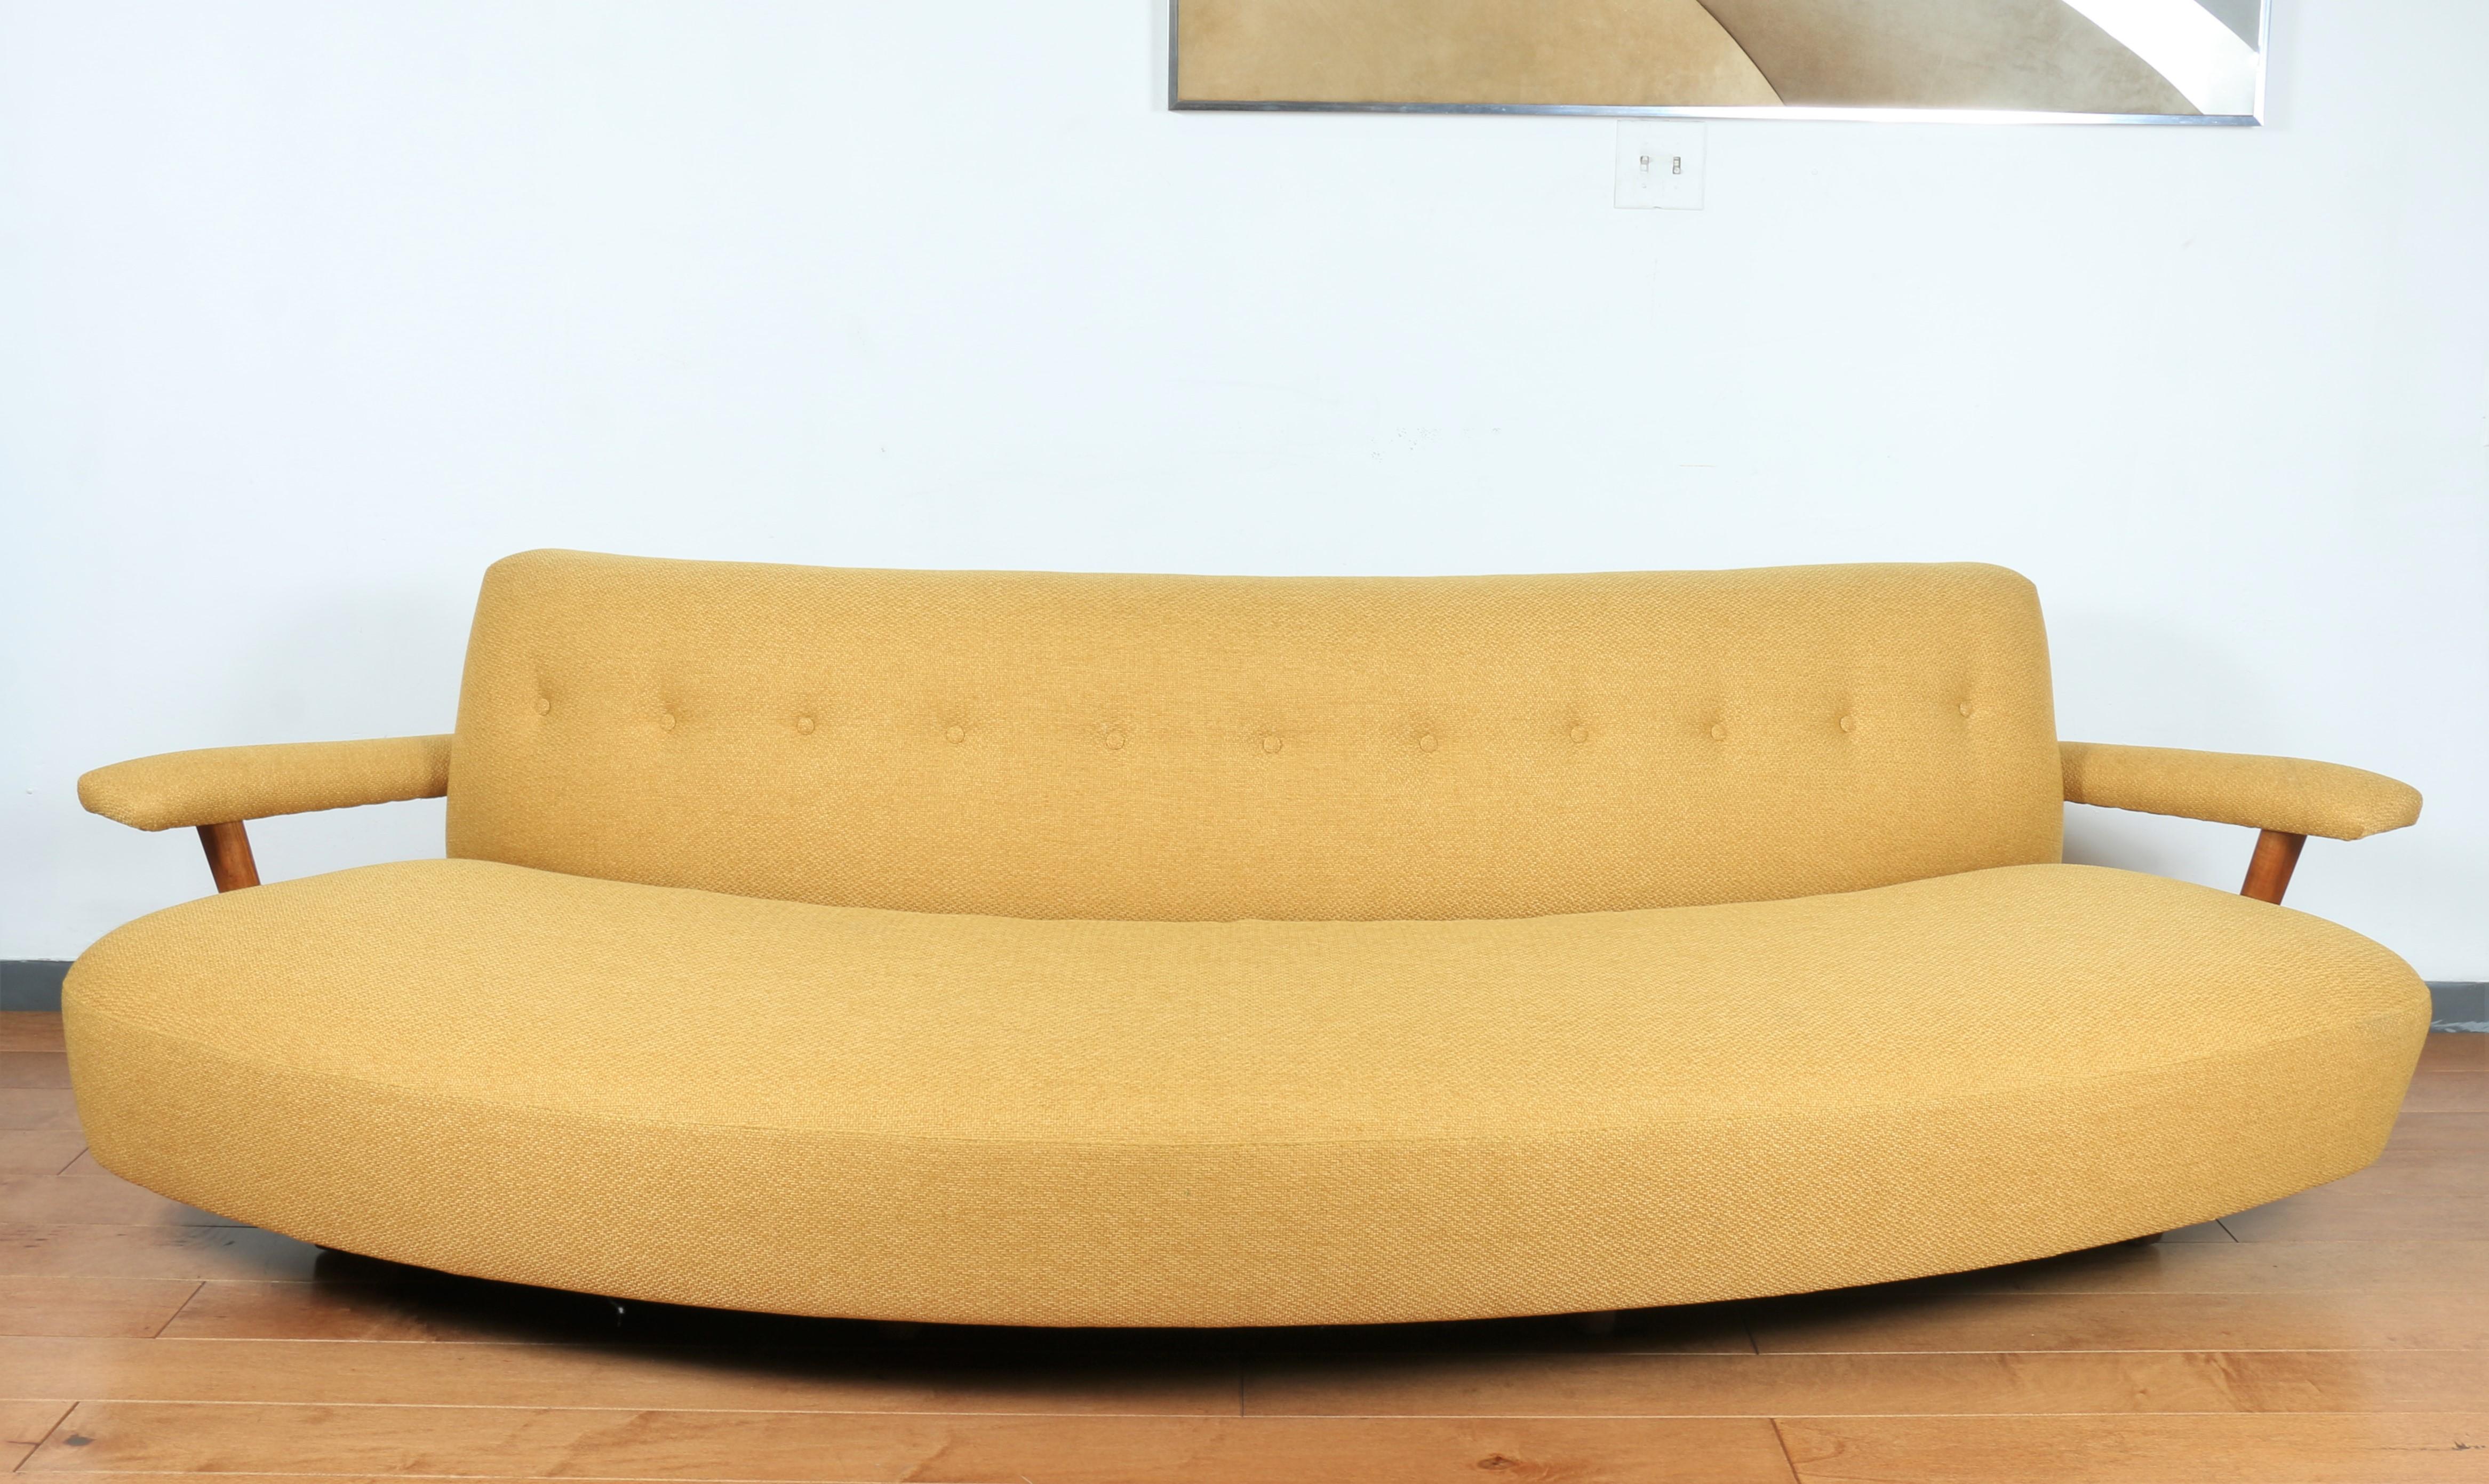 Mid Century curved yellow sofa with oak wood arm rest. In very good condition, no stains or marks. New upholstery was made. American made sofa from the 1950's.